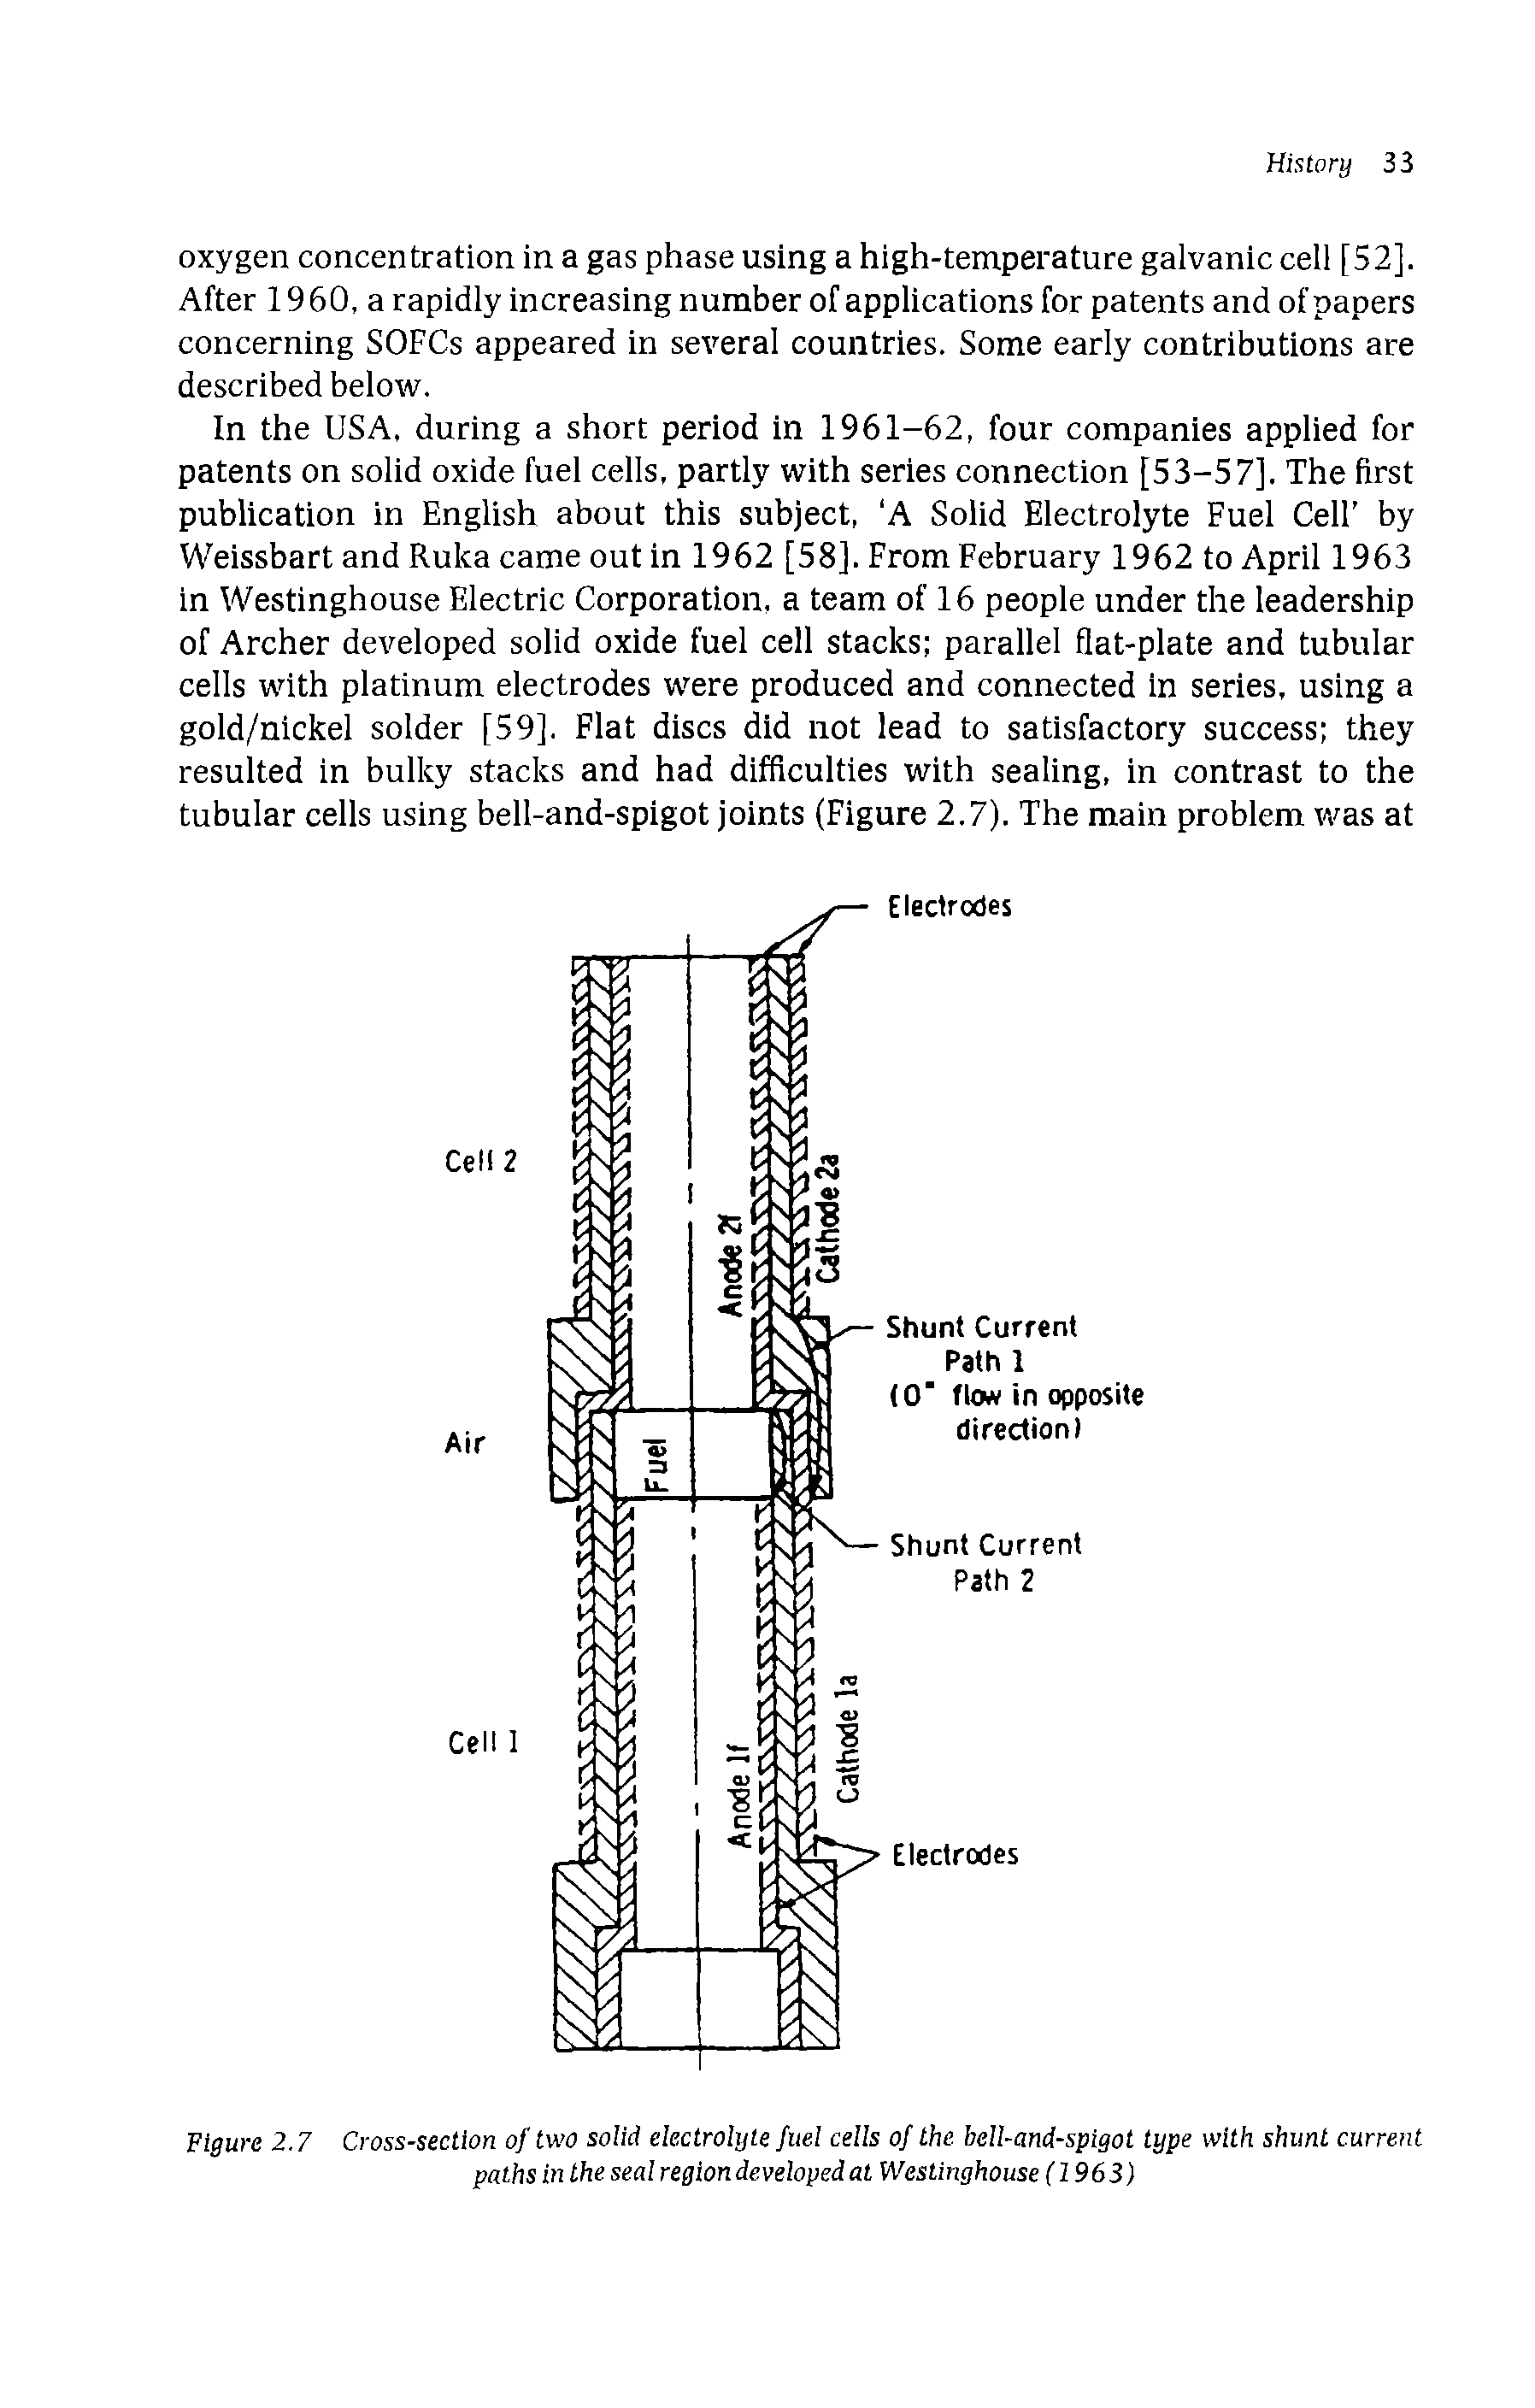 Figure 2.7 Cross-section of two solid electrolyte fuel cells of the bell-and-spigot type with shunt current paths in the seal region developed at Westinghouse (1963)...